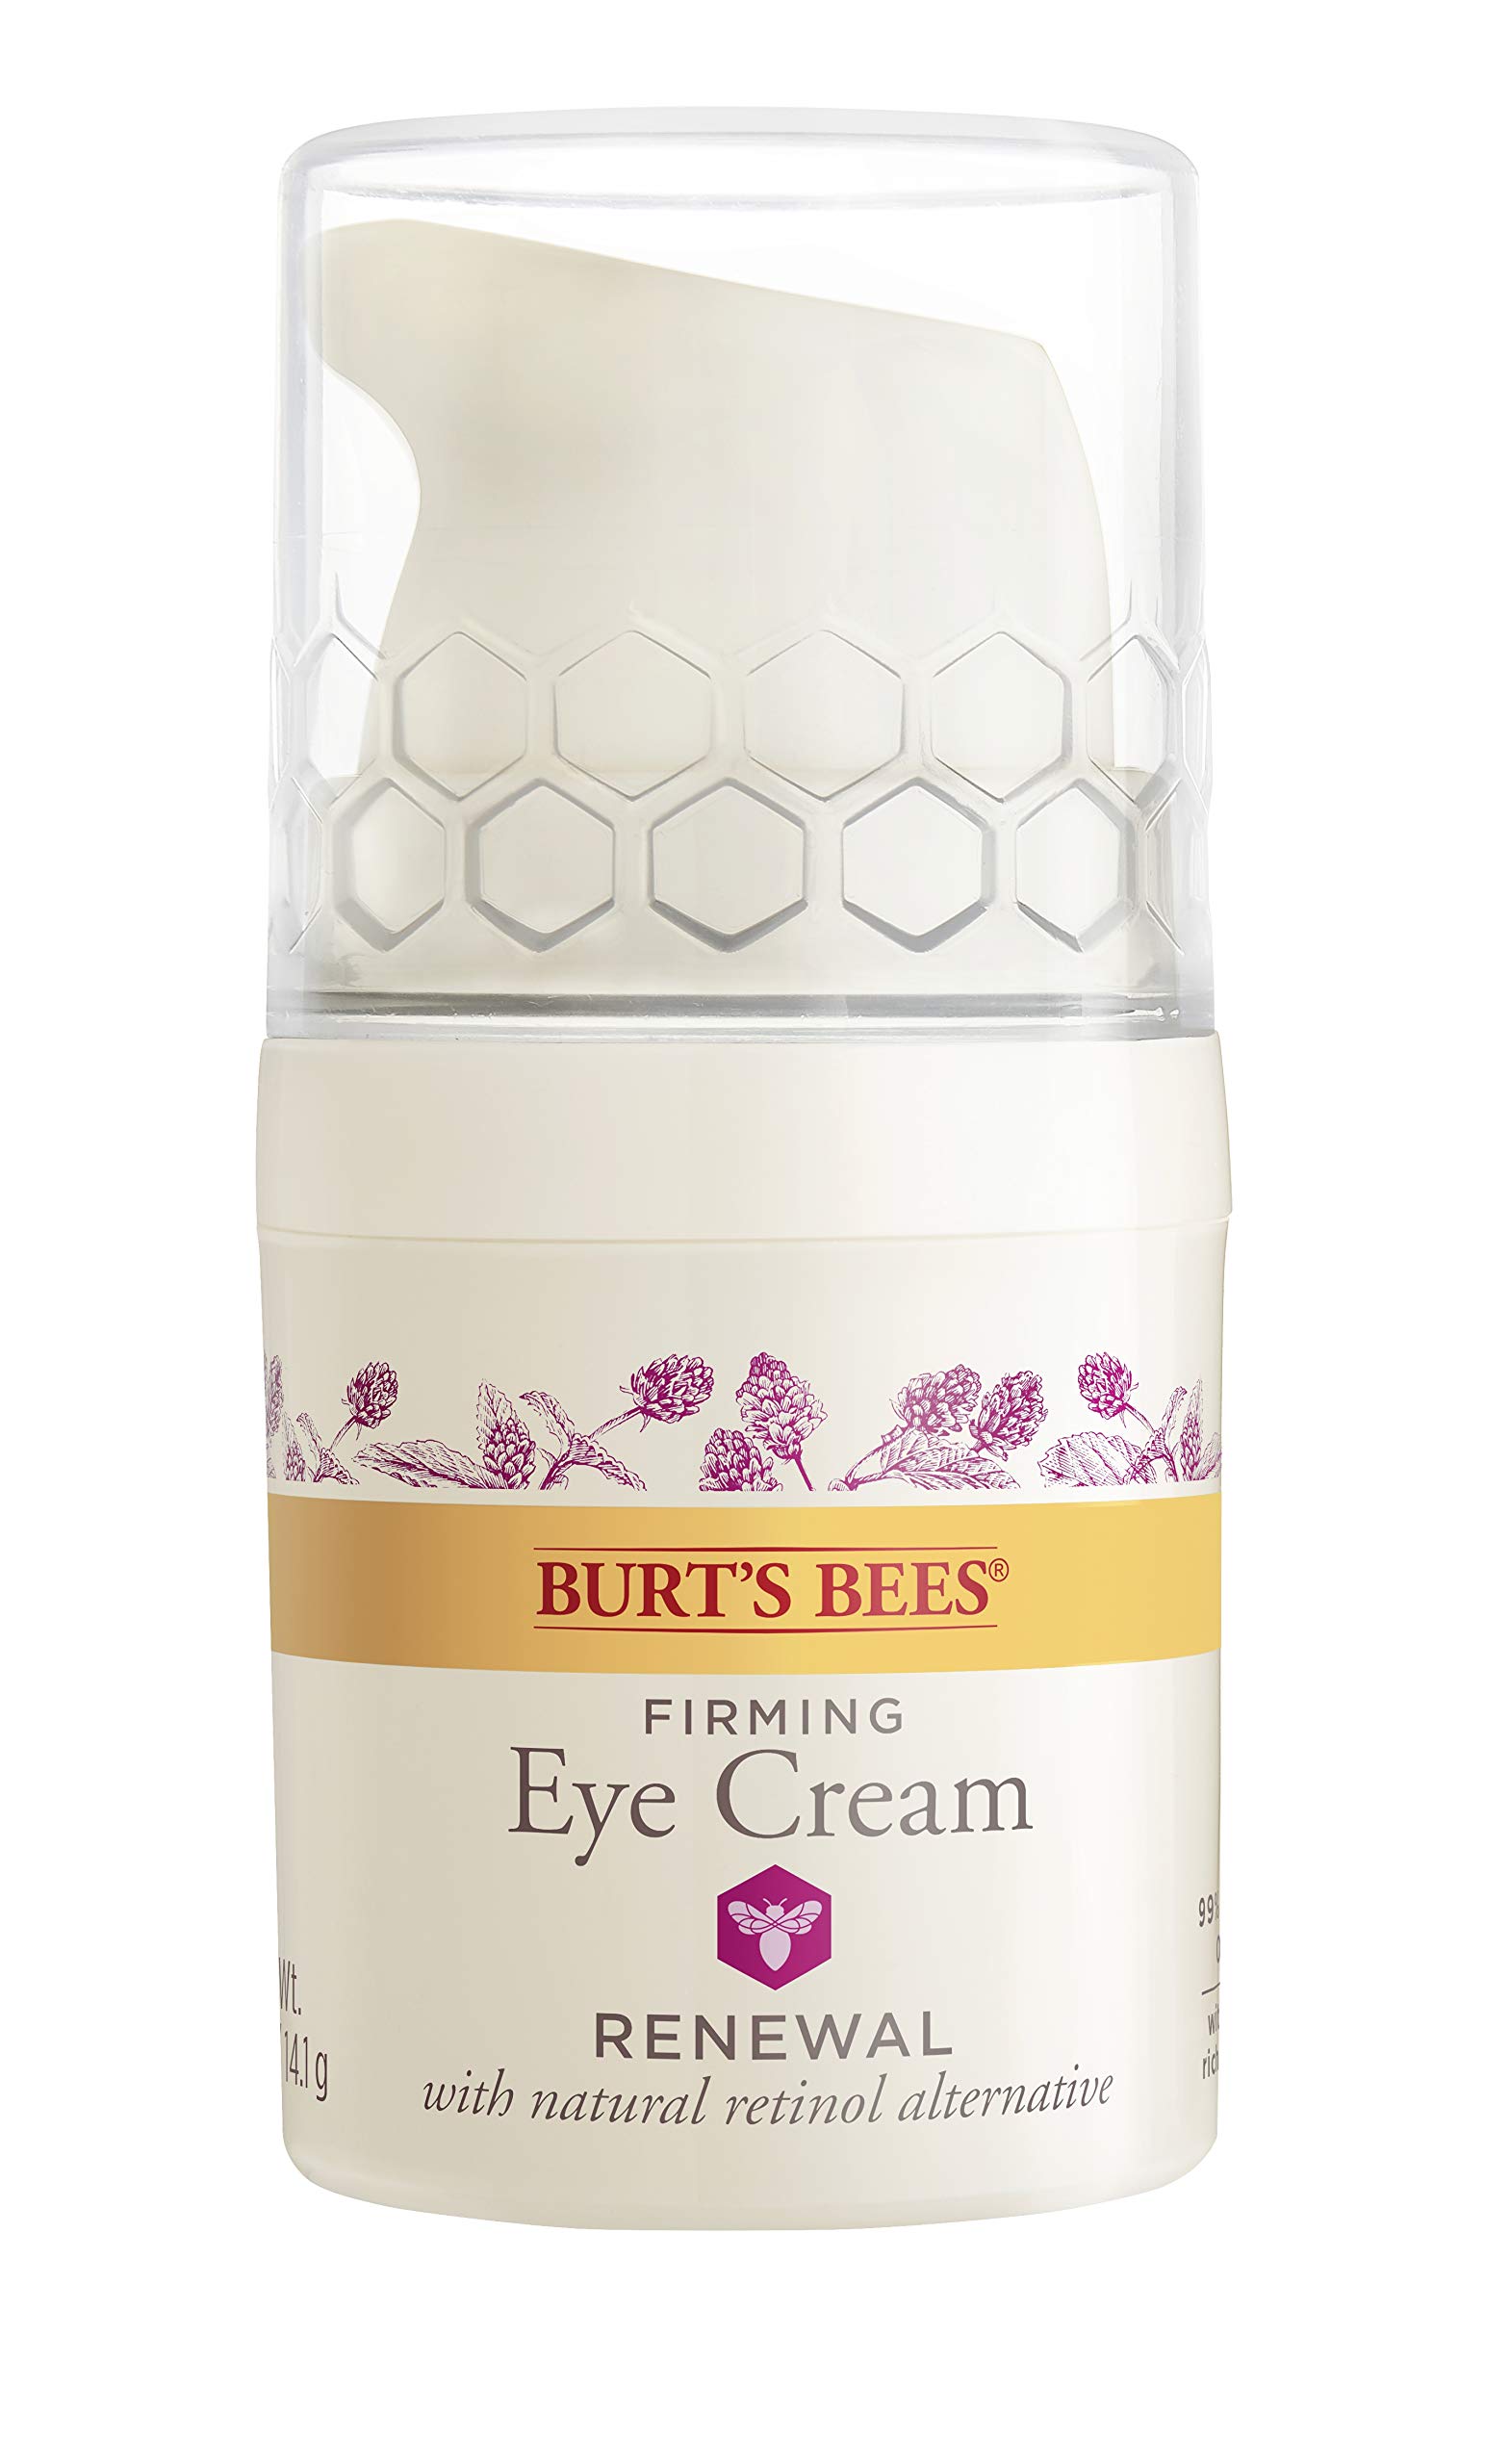 Burts Bees Renewal Smoothing Eye Cream, 0.58 Ounce by Burt's Bees